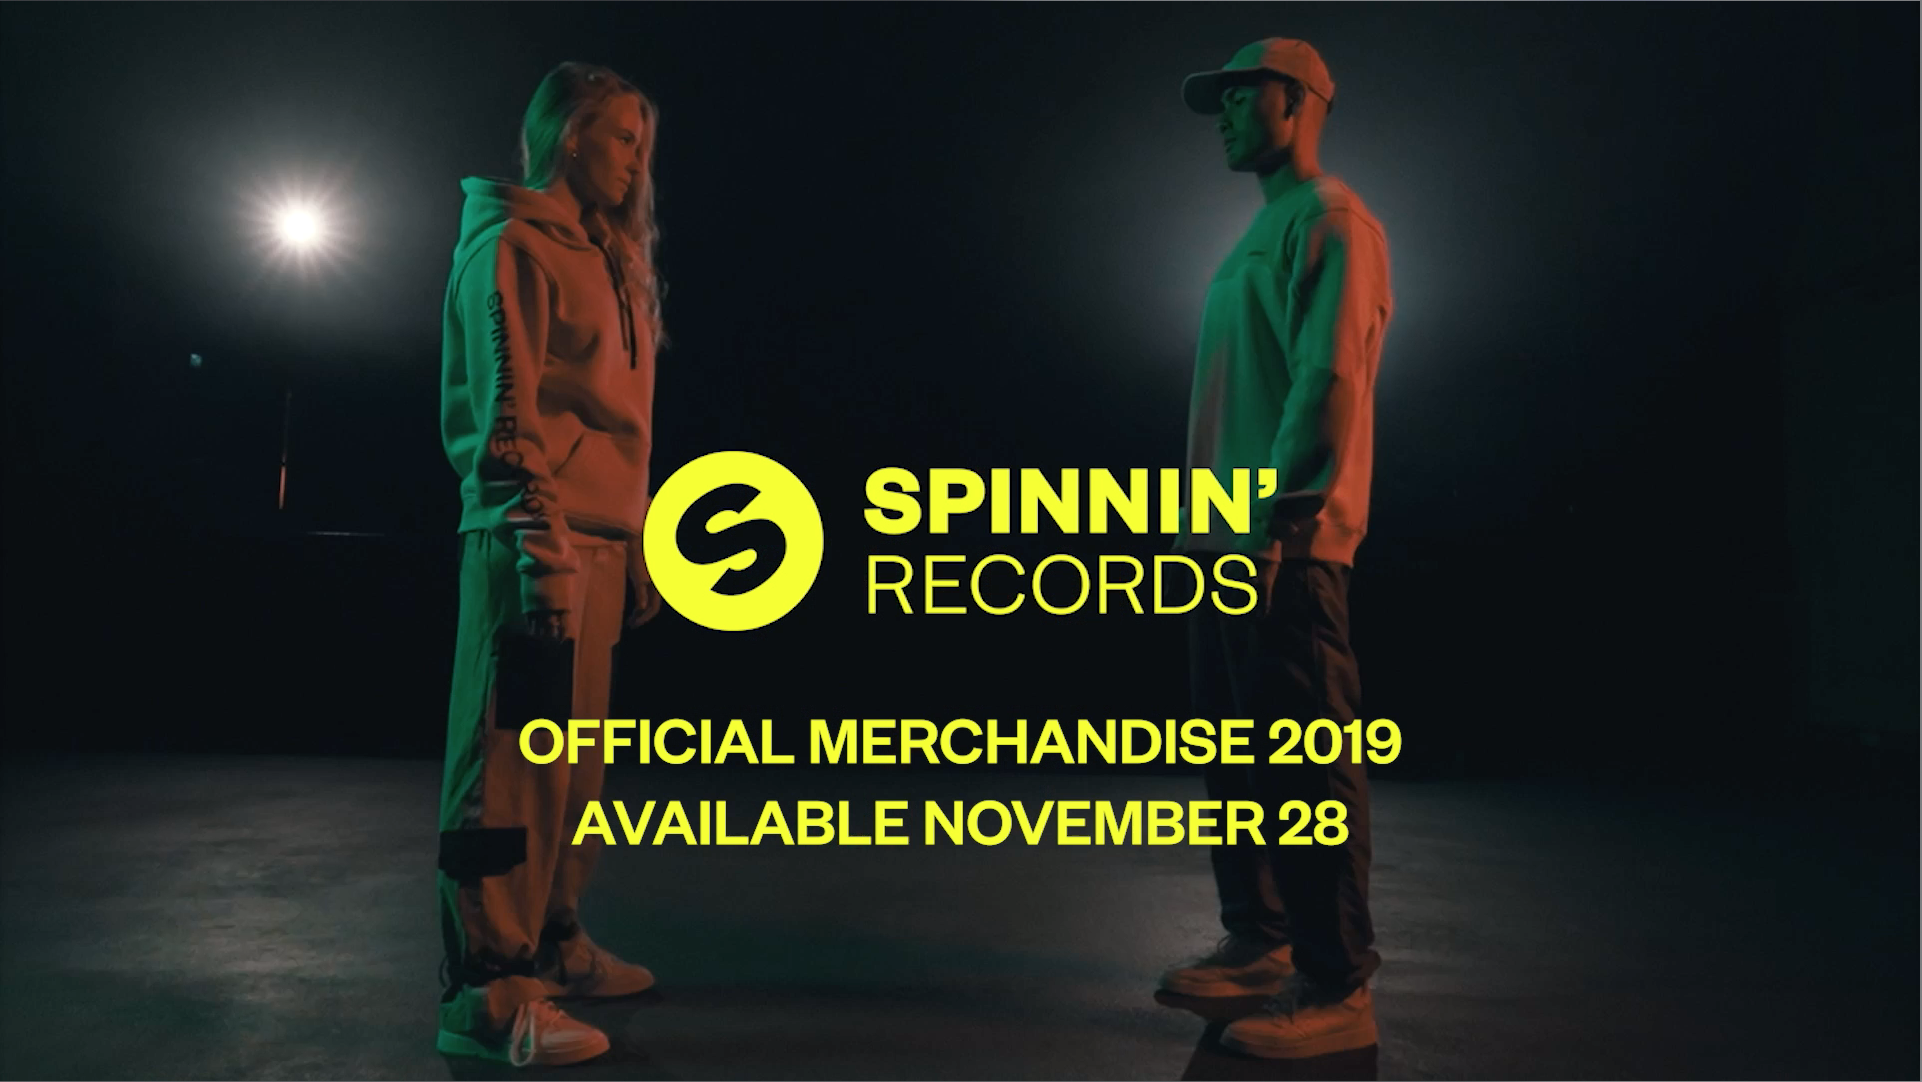 Spinnin' Records Official Merchandise 2019 - OUT NOW!